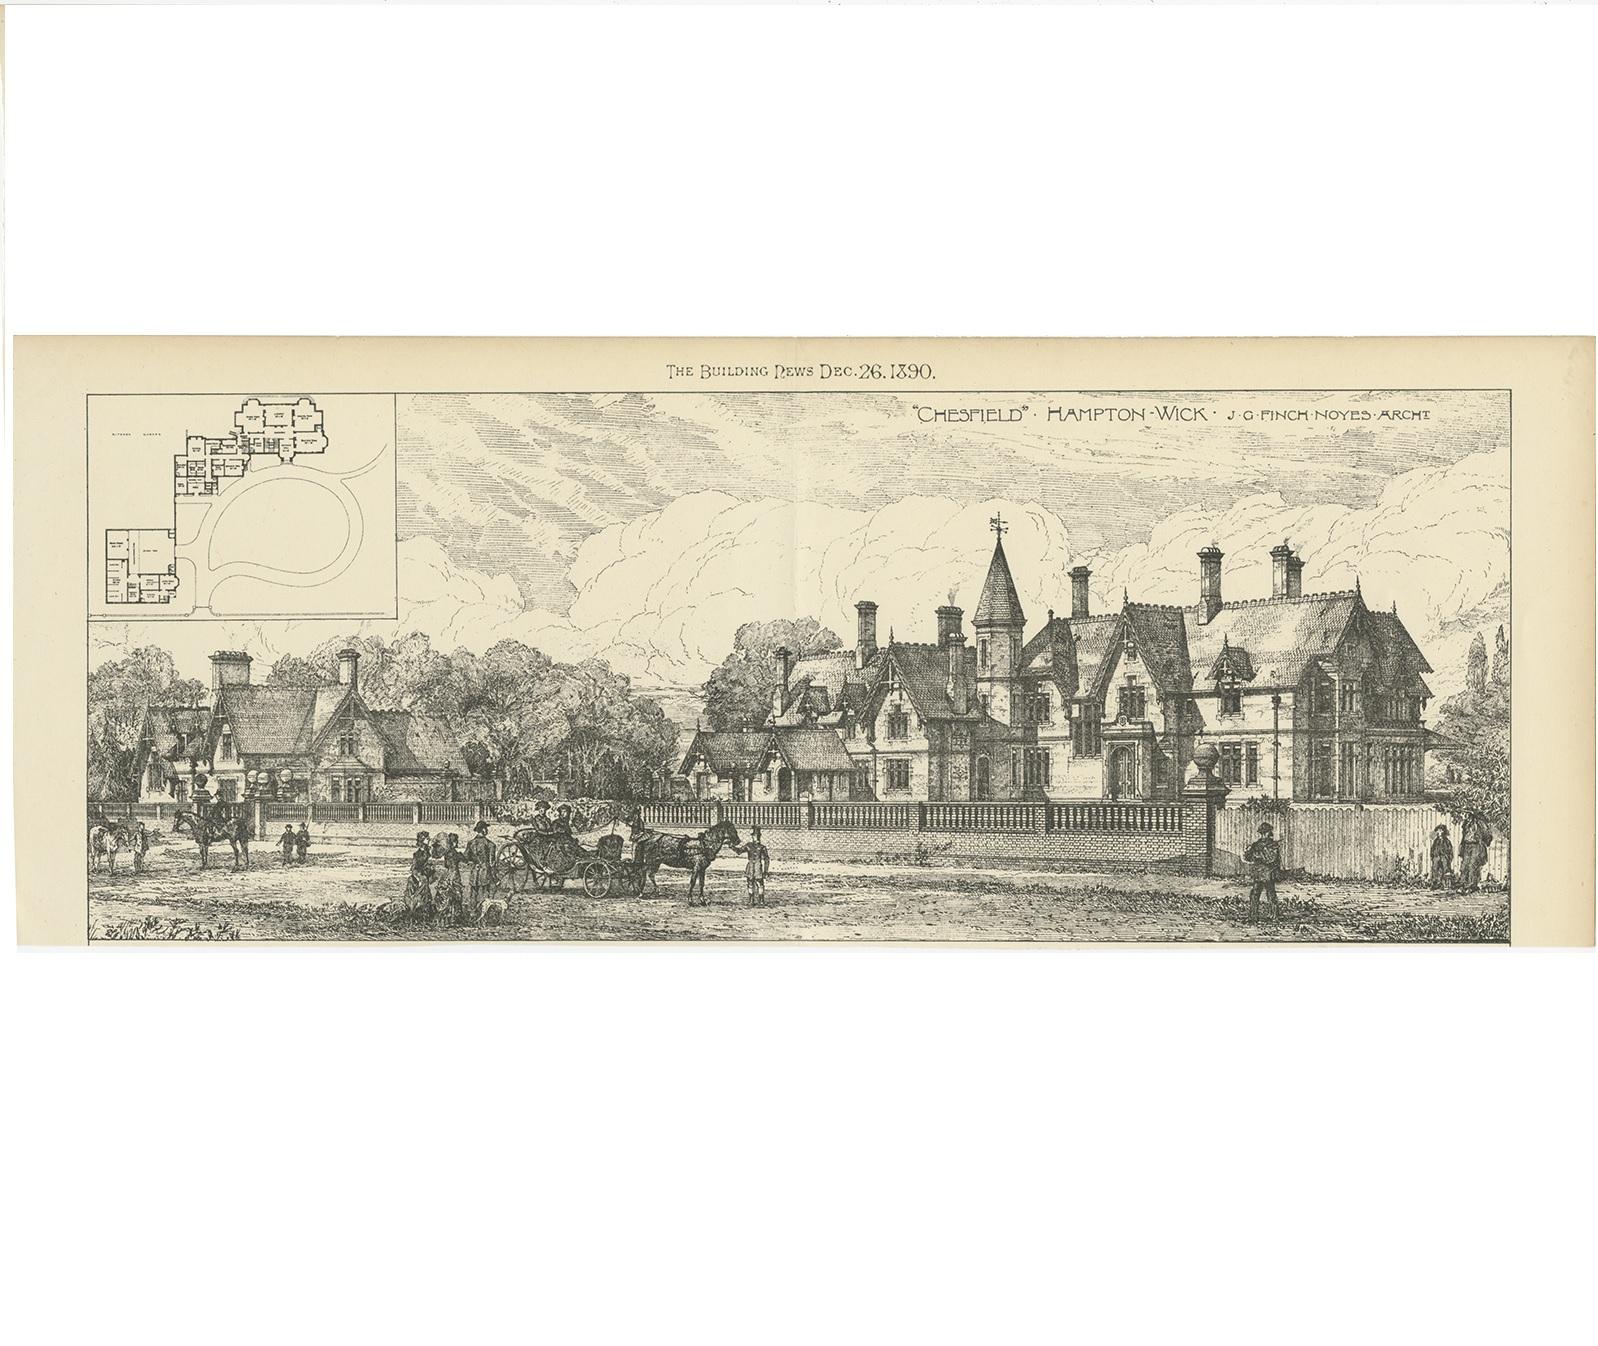 Antique print titled 'Chesfield Hampton-Wick'. View of a house in Hampton Wick, designed by J.G. Finch-Noyes. This print originates from 'The Building News'.